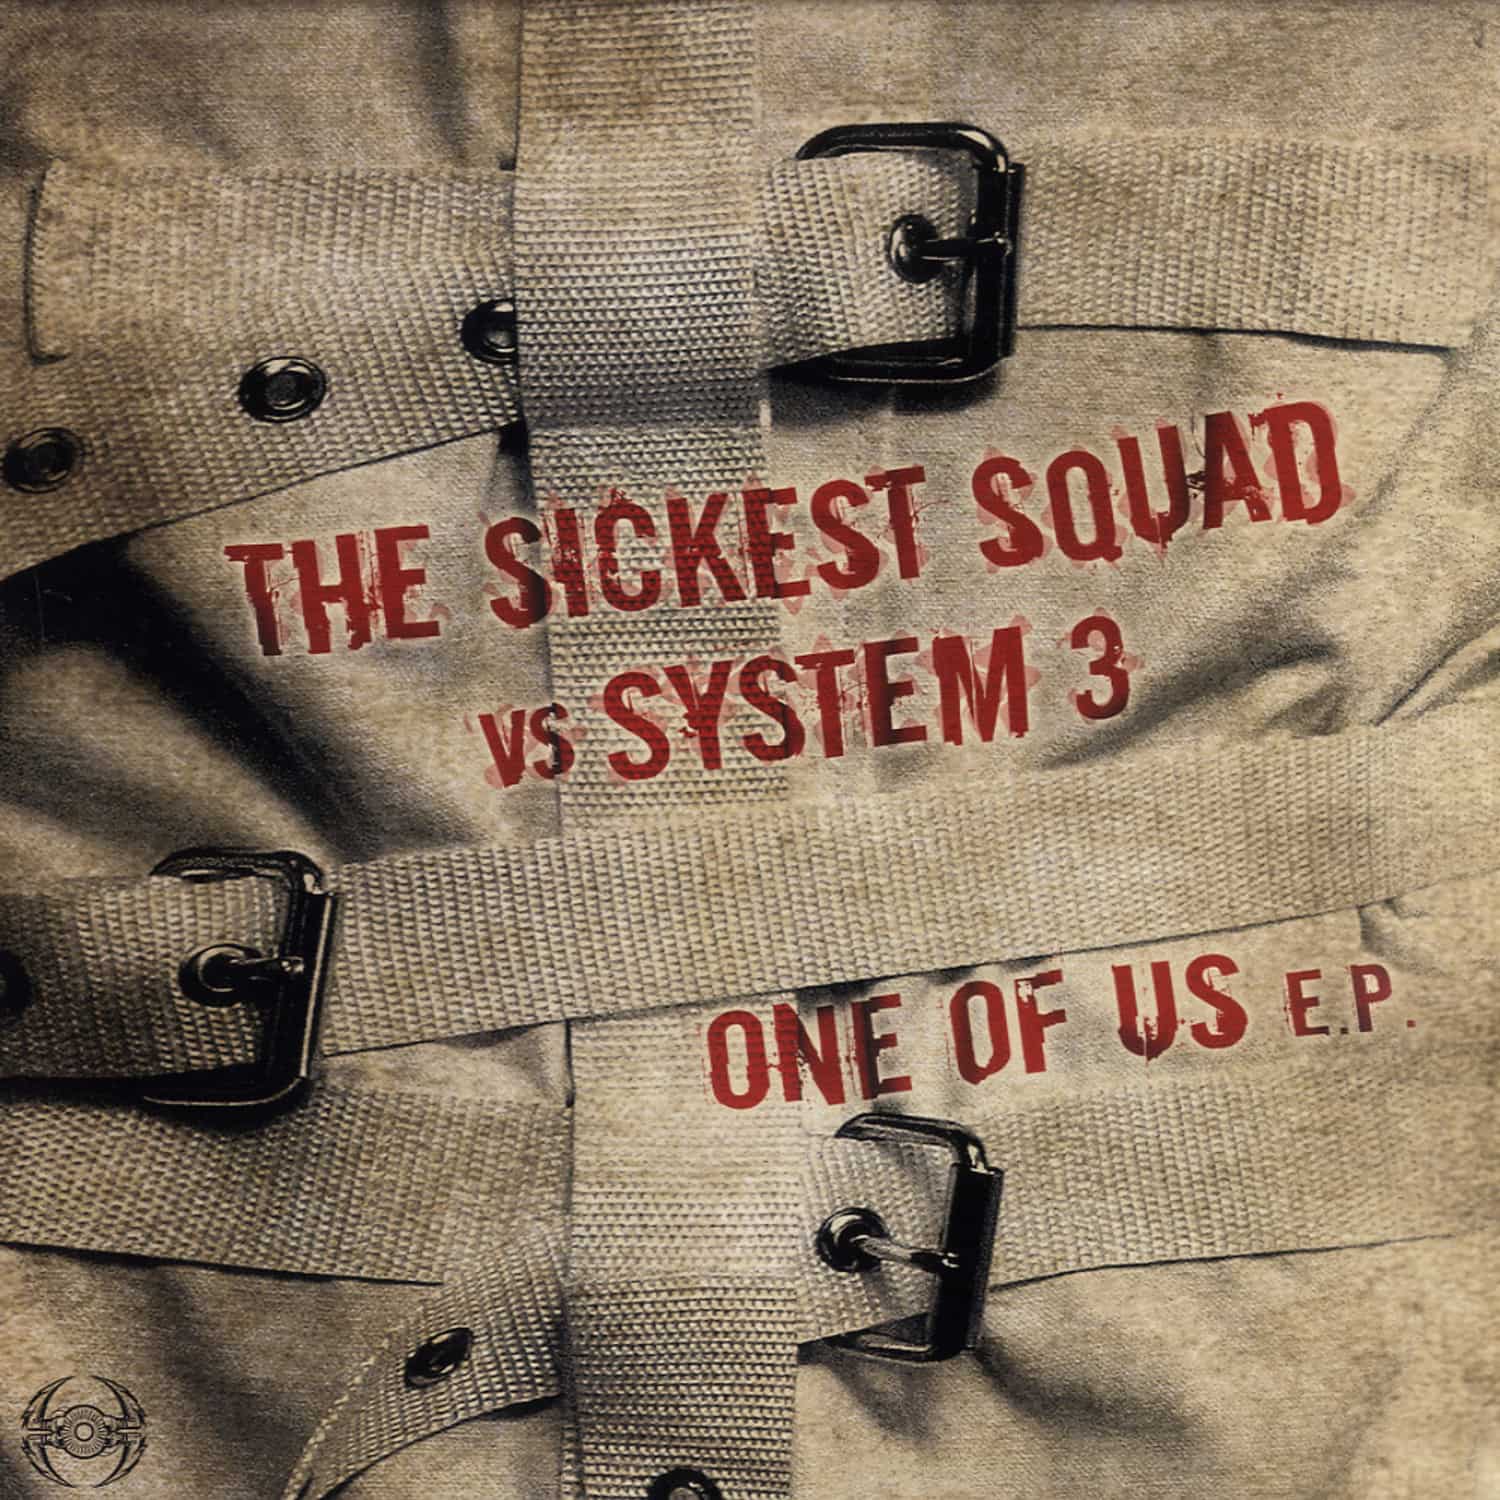 Sickest Squad vs. System 3 - ONE OF US EP